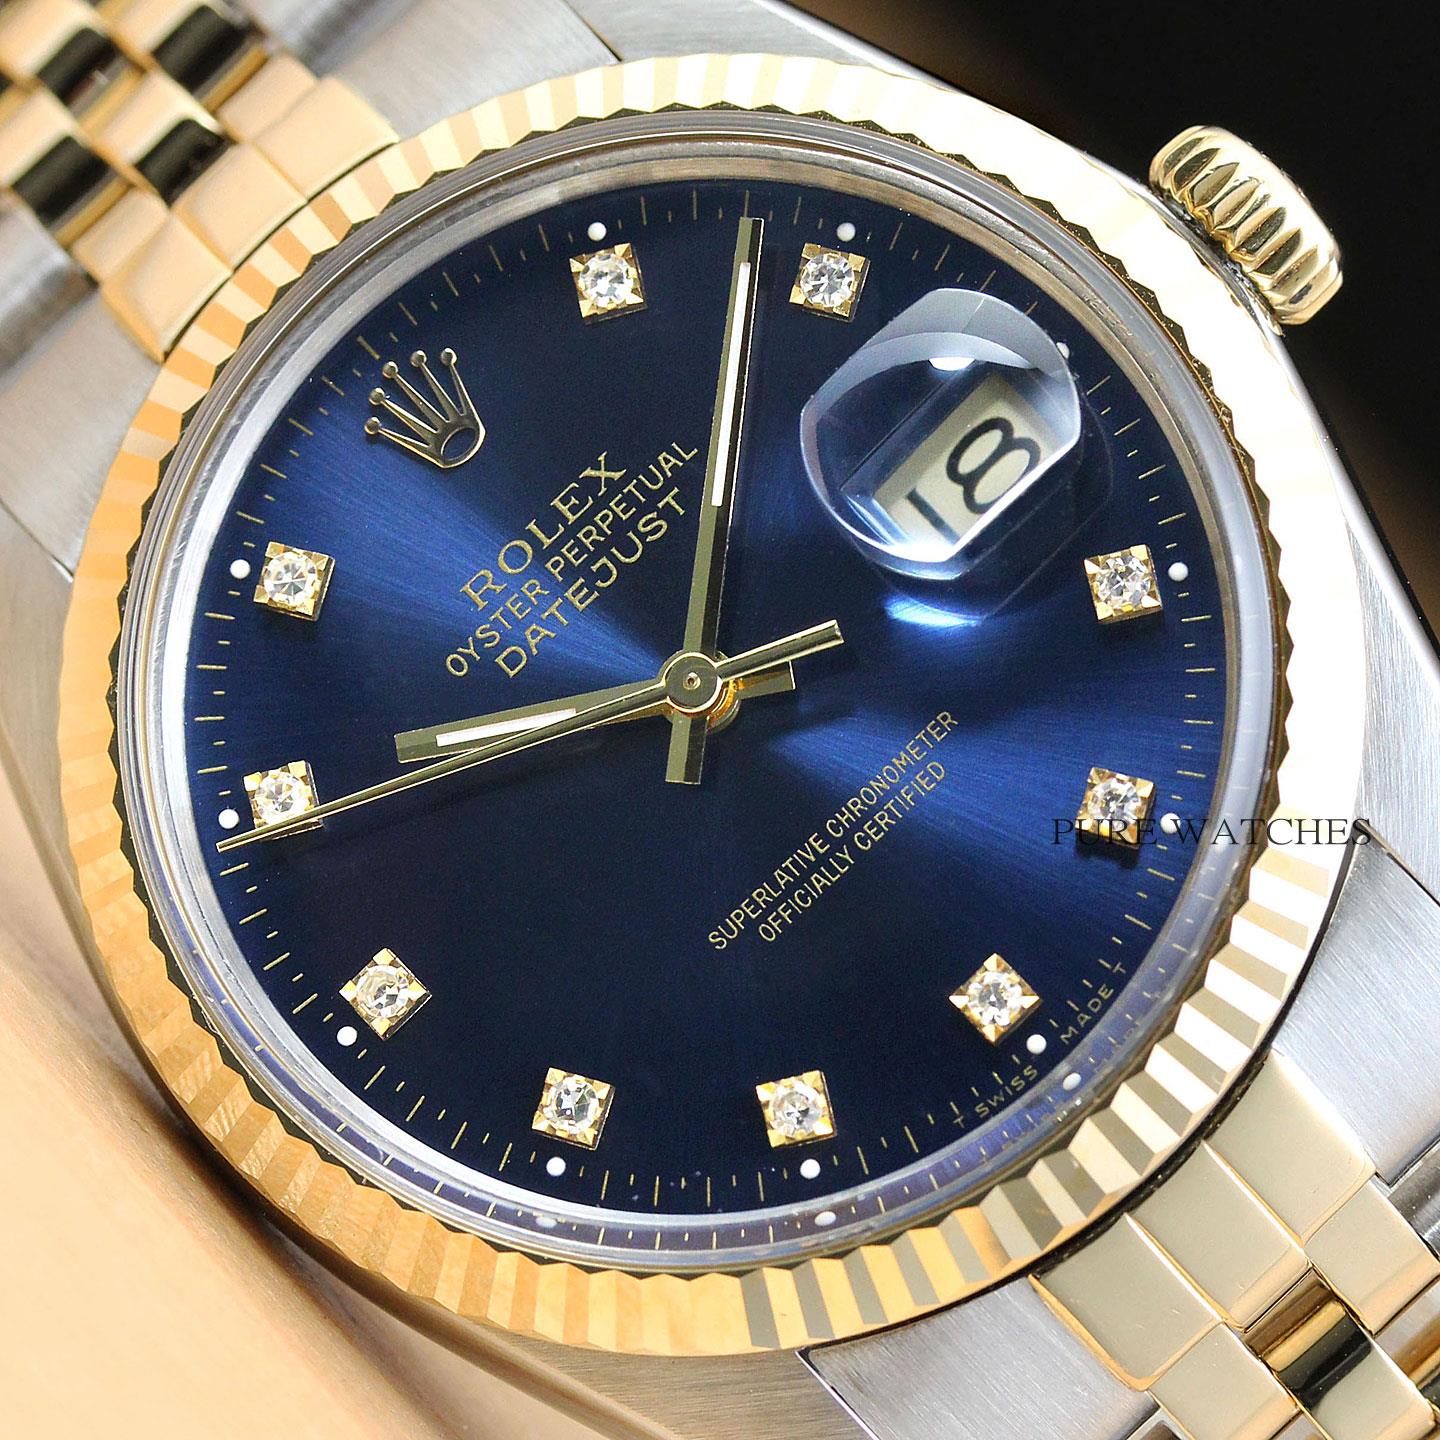 ROLEX MENS DATEJUST FACTORY DIAMOND DIAL 18K YELLOW GOLD/STAINLESS ...